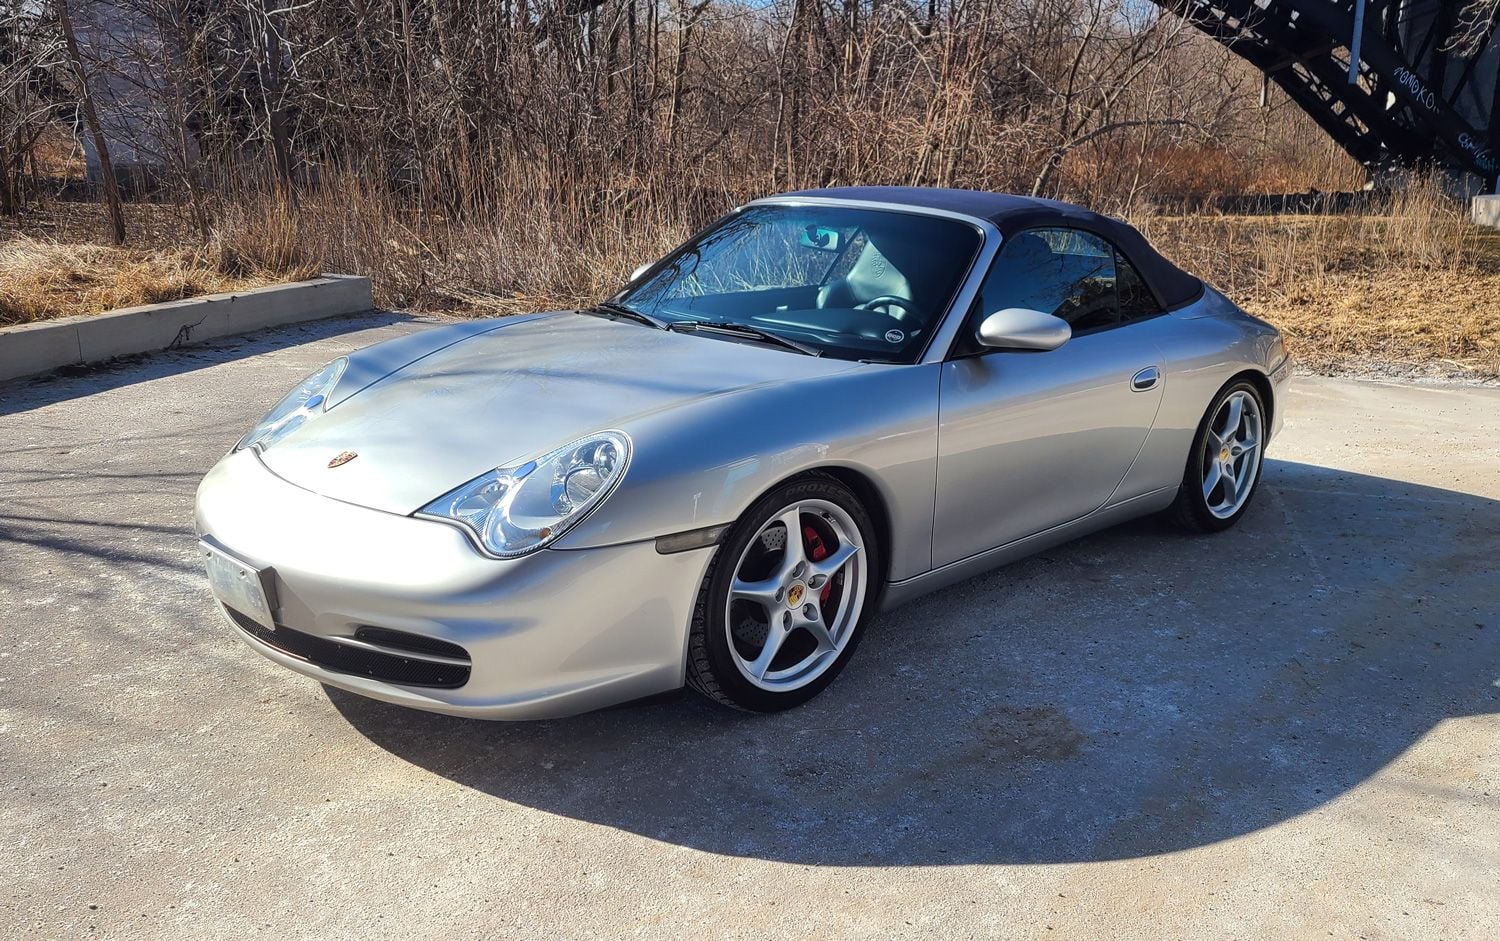 2002 Porsche 911 - 2002 911 C2 Cabriolet - Used - VIN WP0CA29972S650586 - 96,000 Miles - 6 cyl - 2WD - Manual - Convertible - Silver - Toronto, ON M6P2Z6, Canada